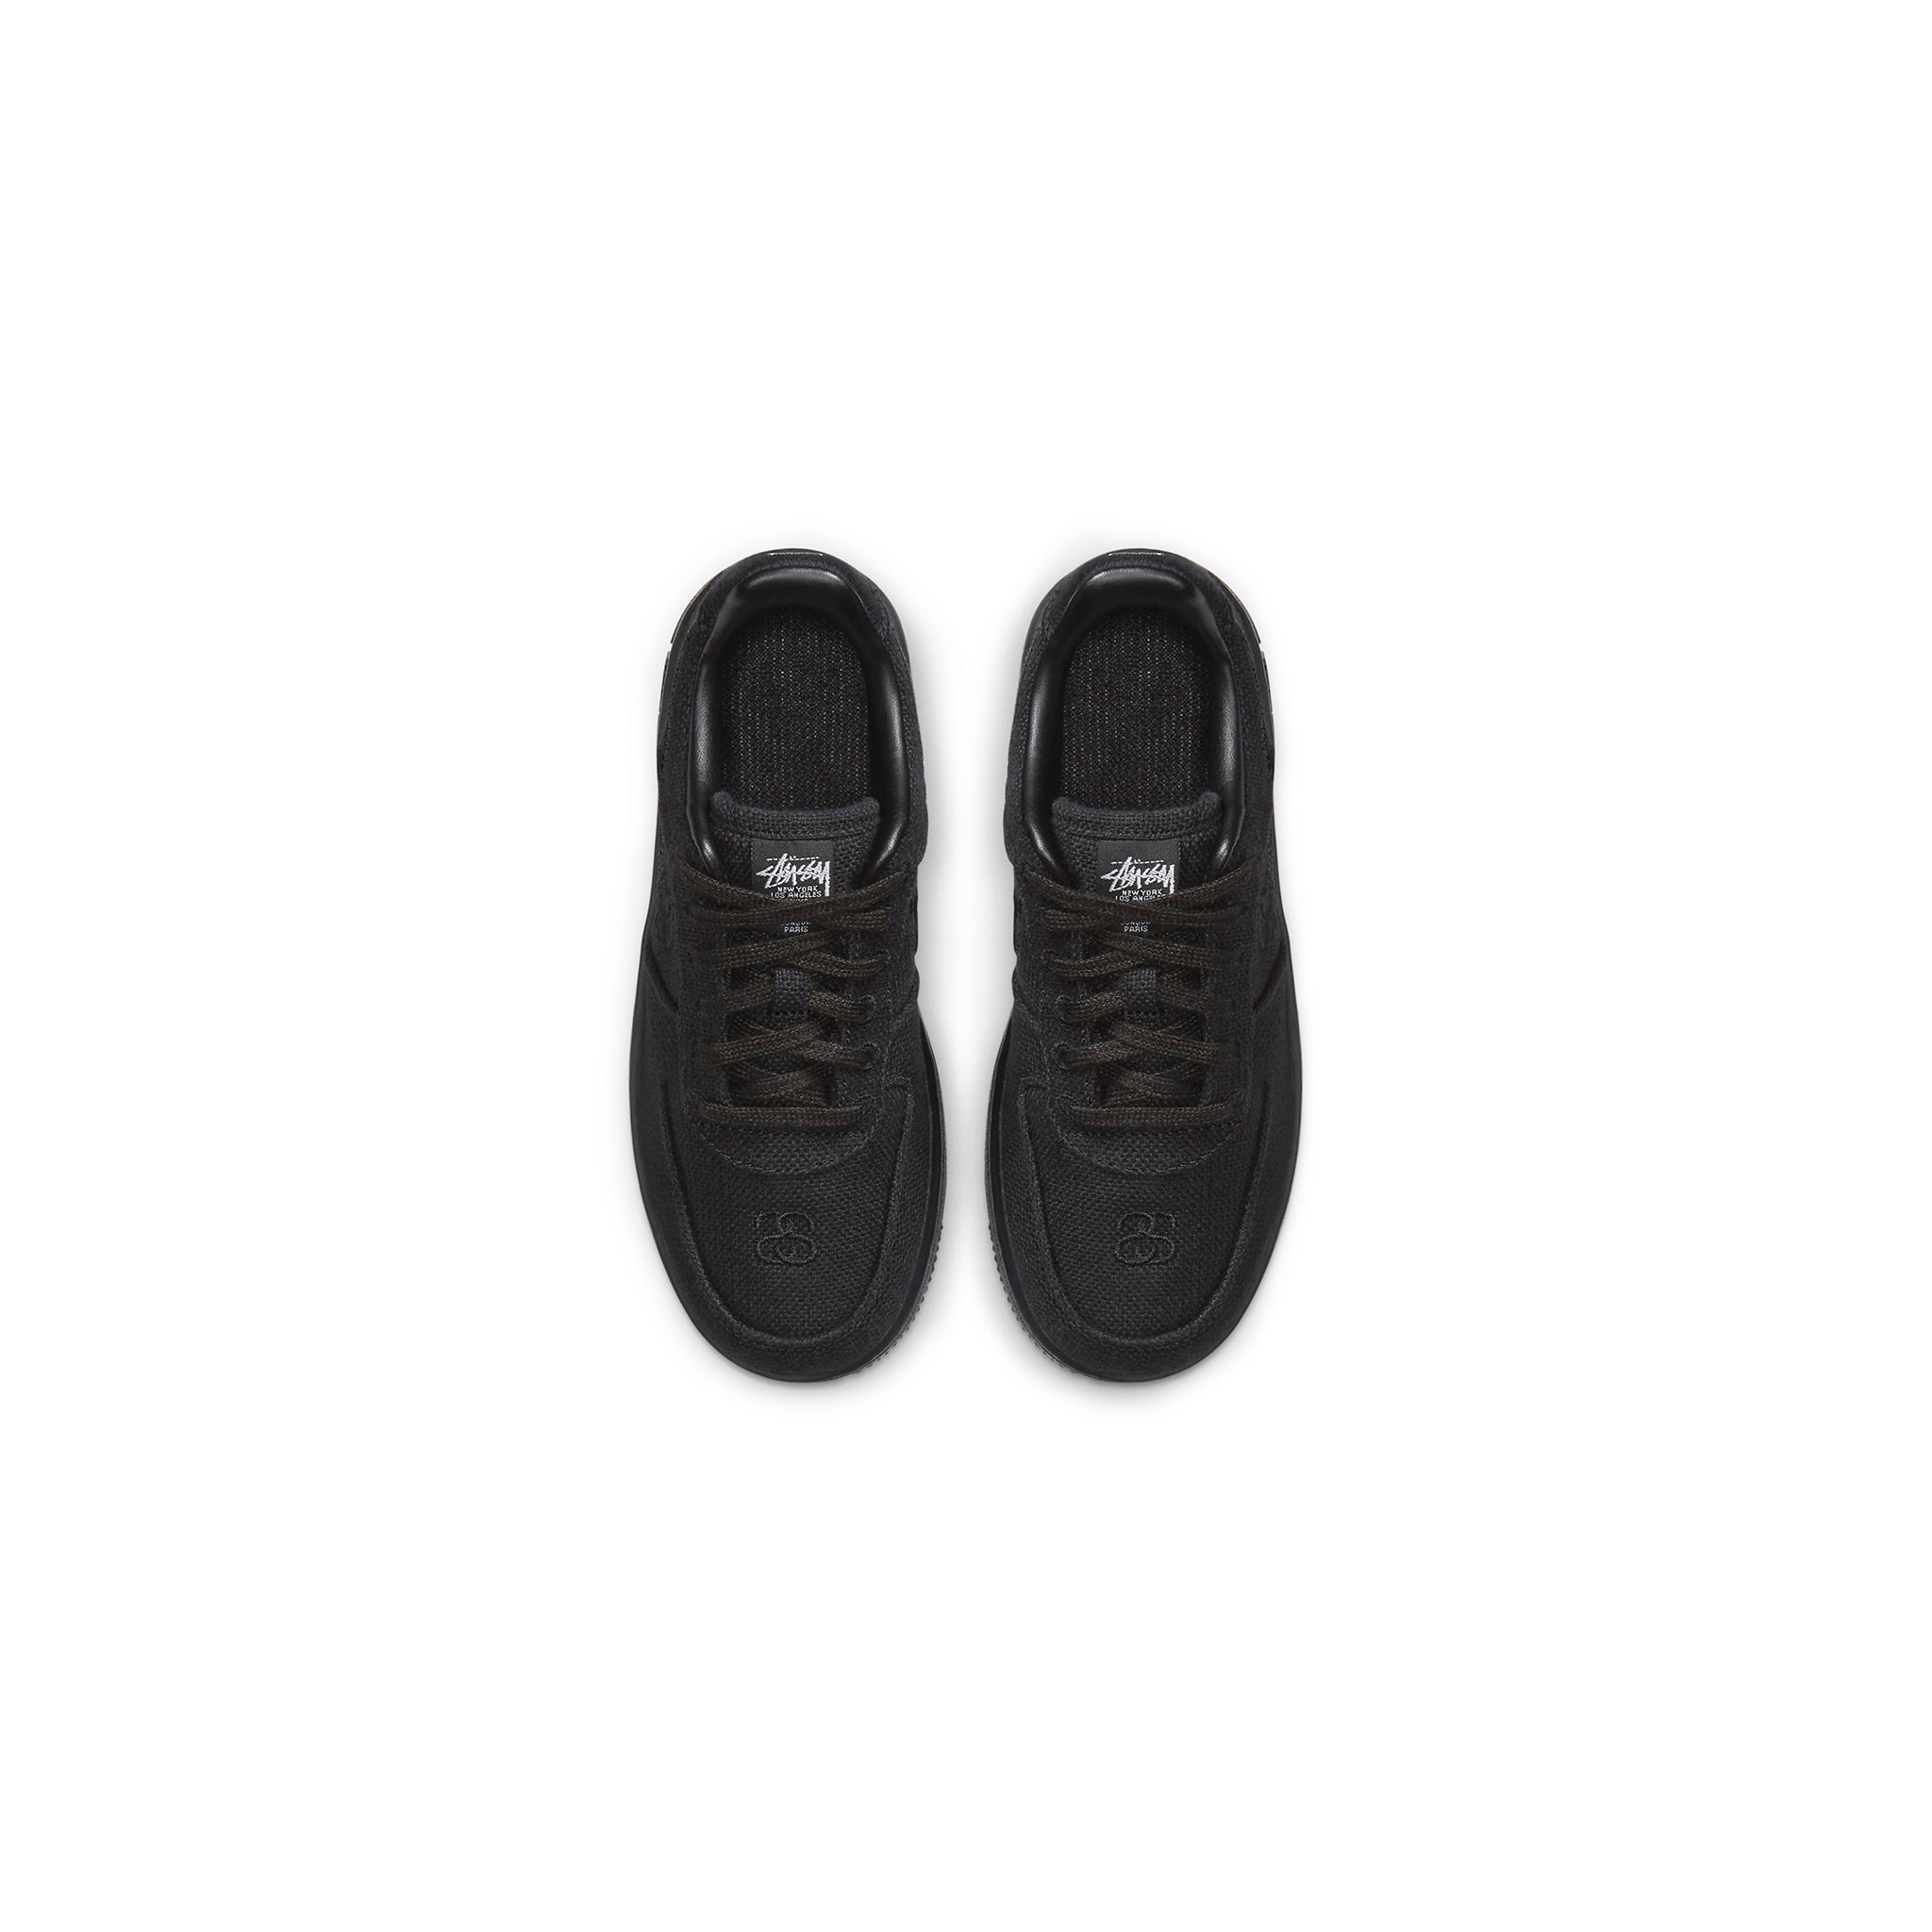 Top view of Stussy x Nike Air Force 1 Low Black (PS) DD1578-001